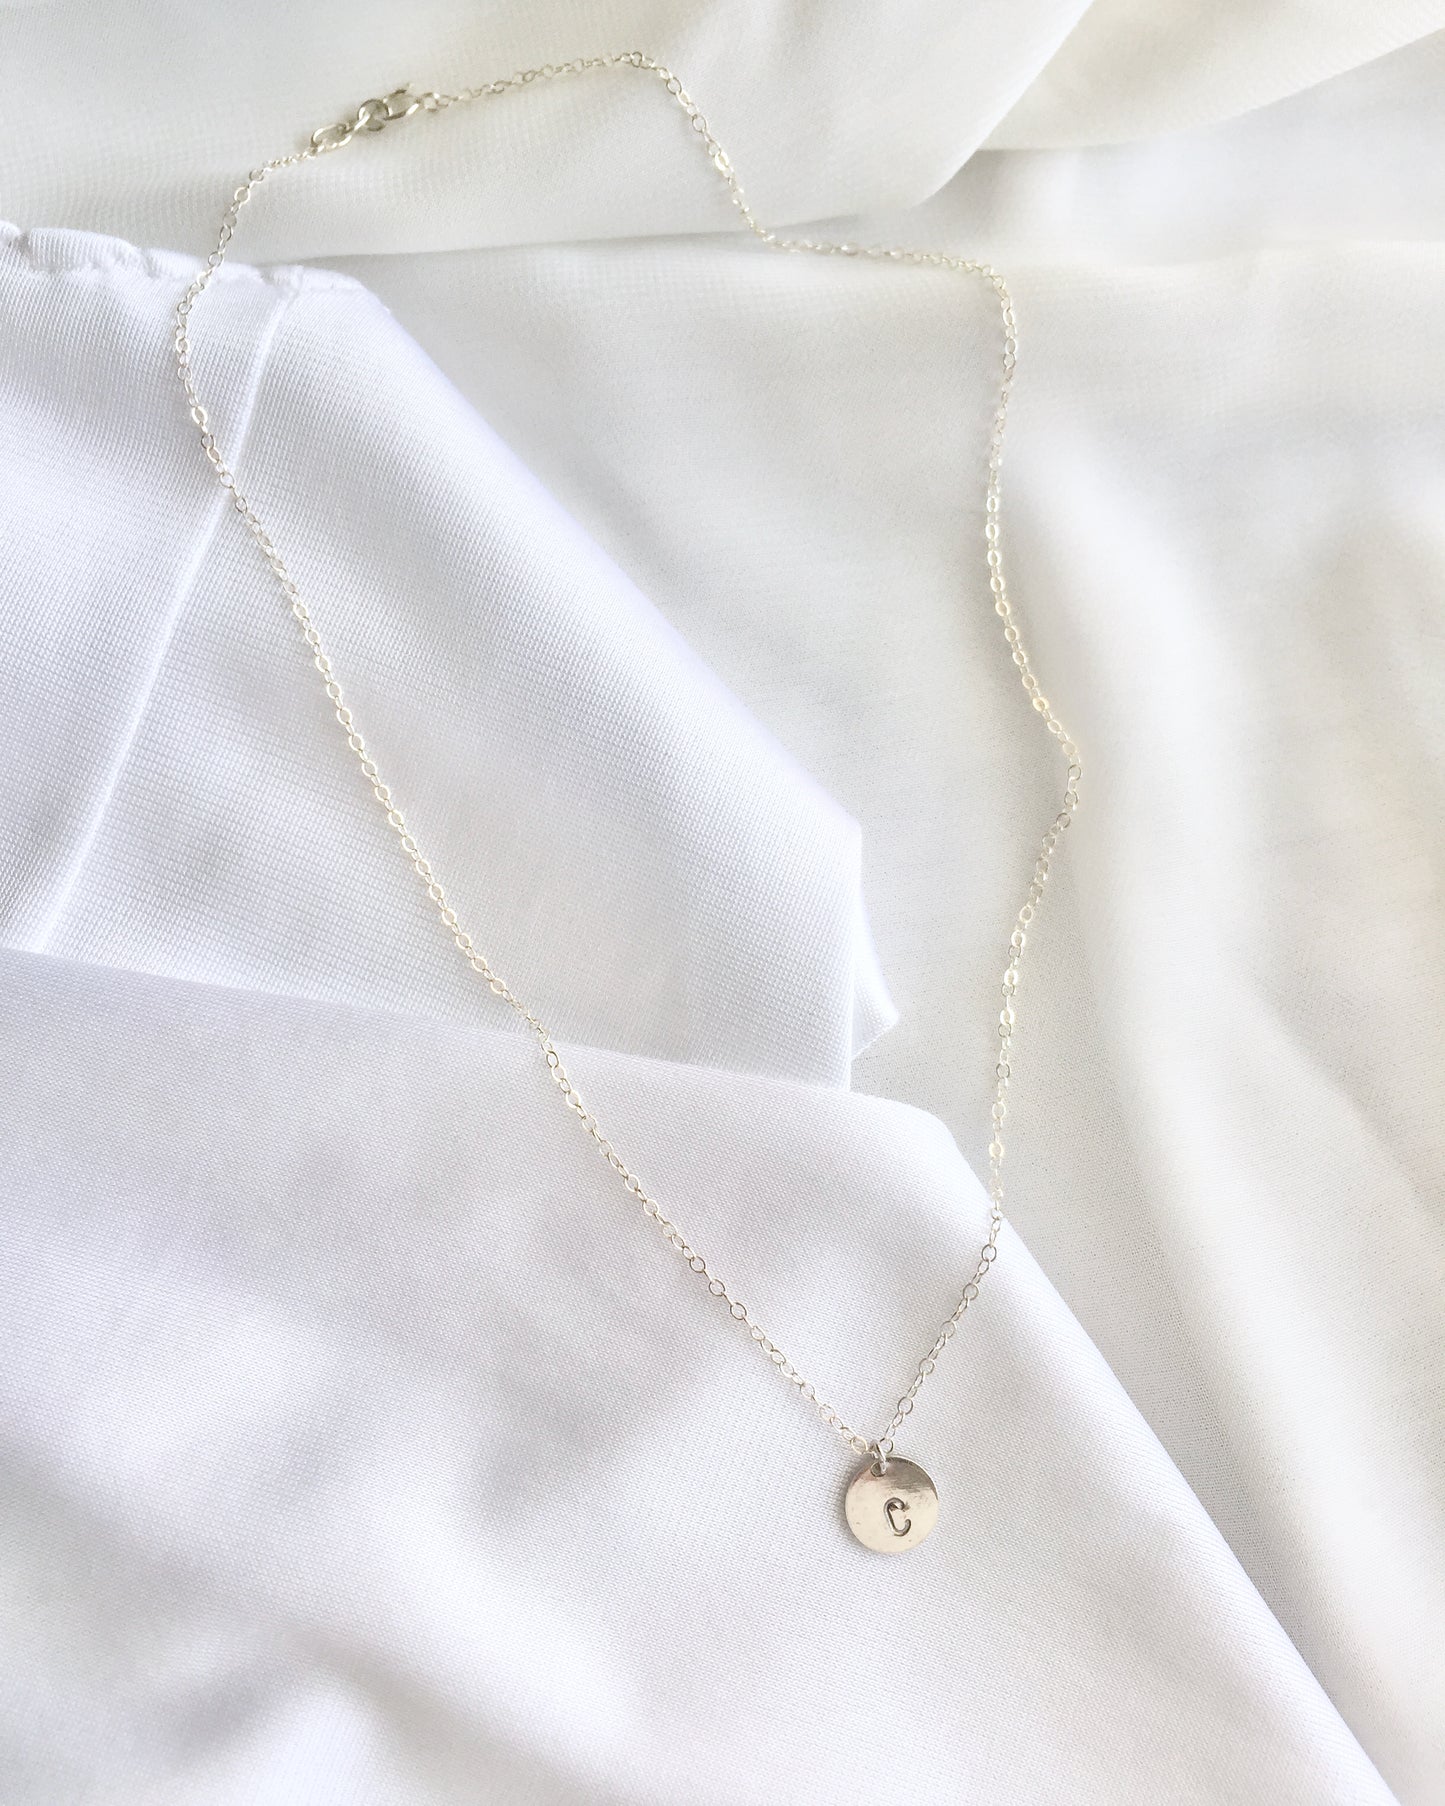 Dainty Everyday Necklace | Minimal Initial Necklace | Small Initial Disc Necklace | IB Jewelry